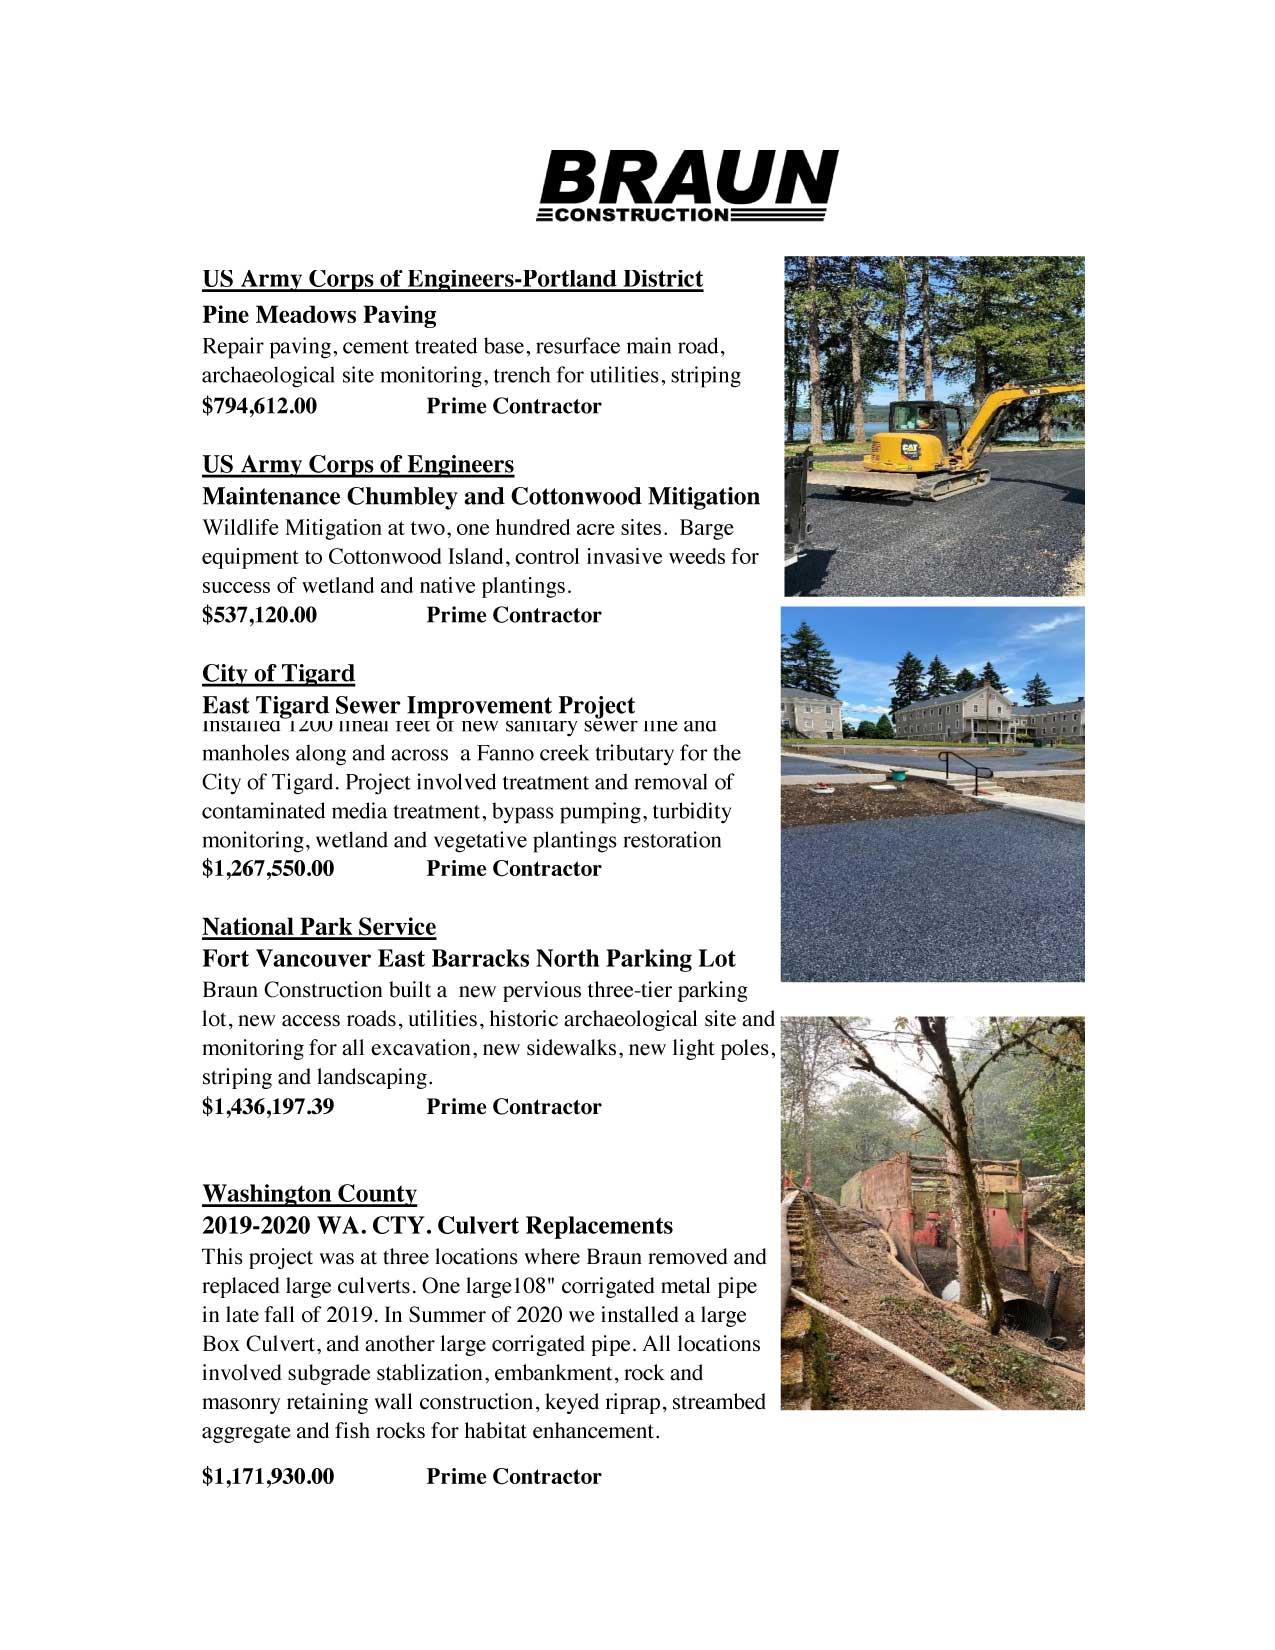 2021 Braun Construction Capabilities Statement - Page Two